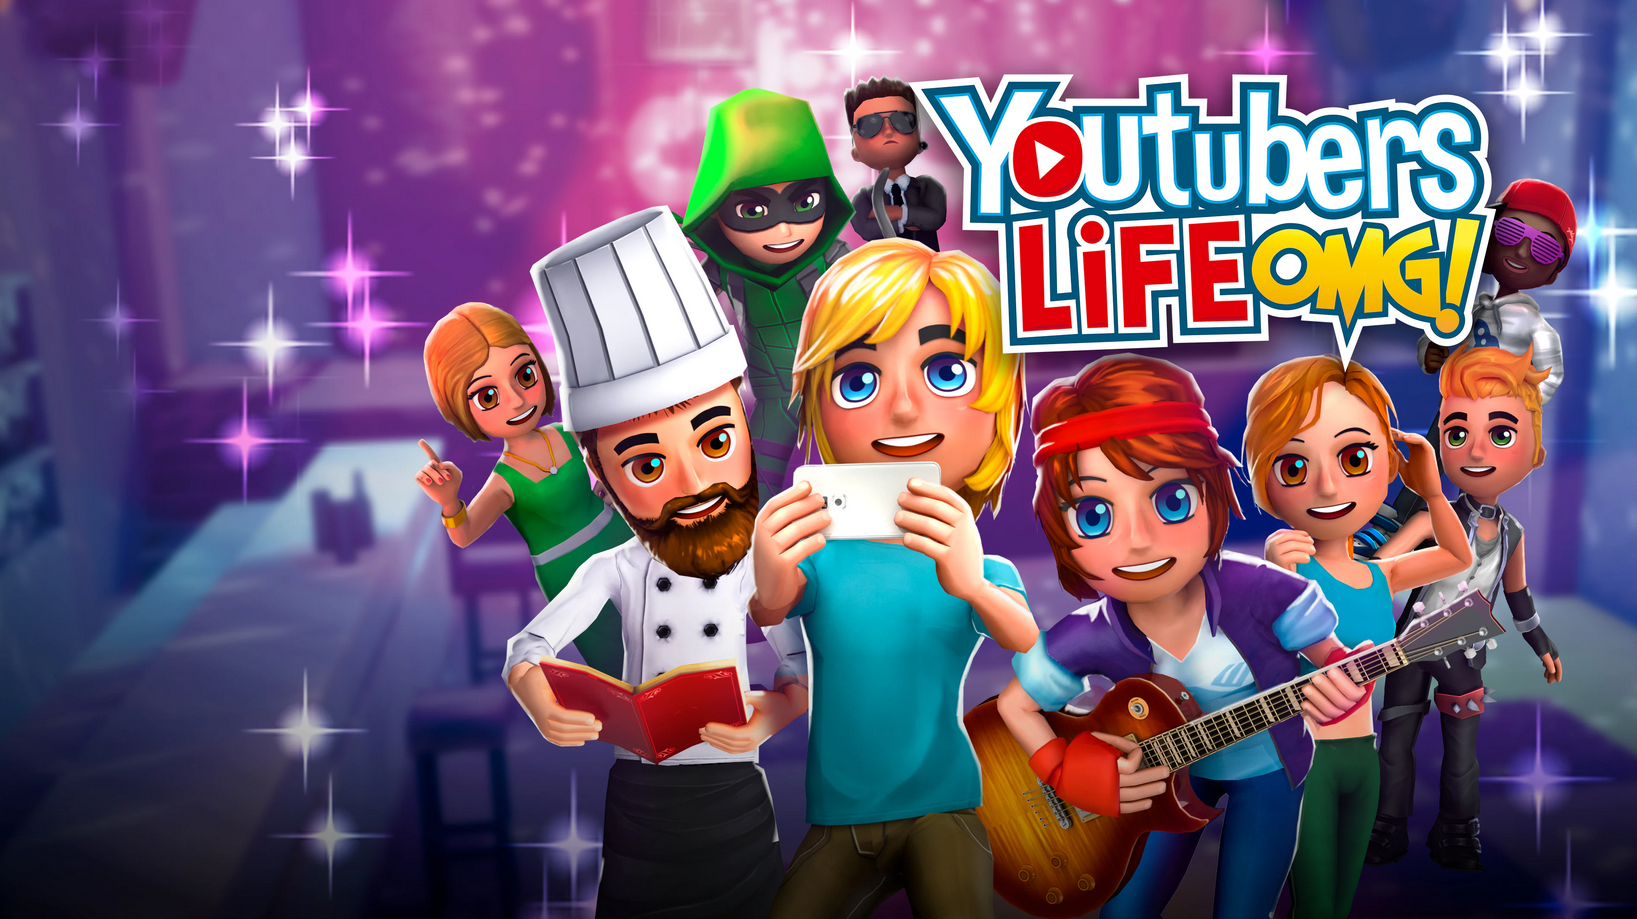 YouTubers Life Top 4 Fashion Video Games - 2